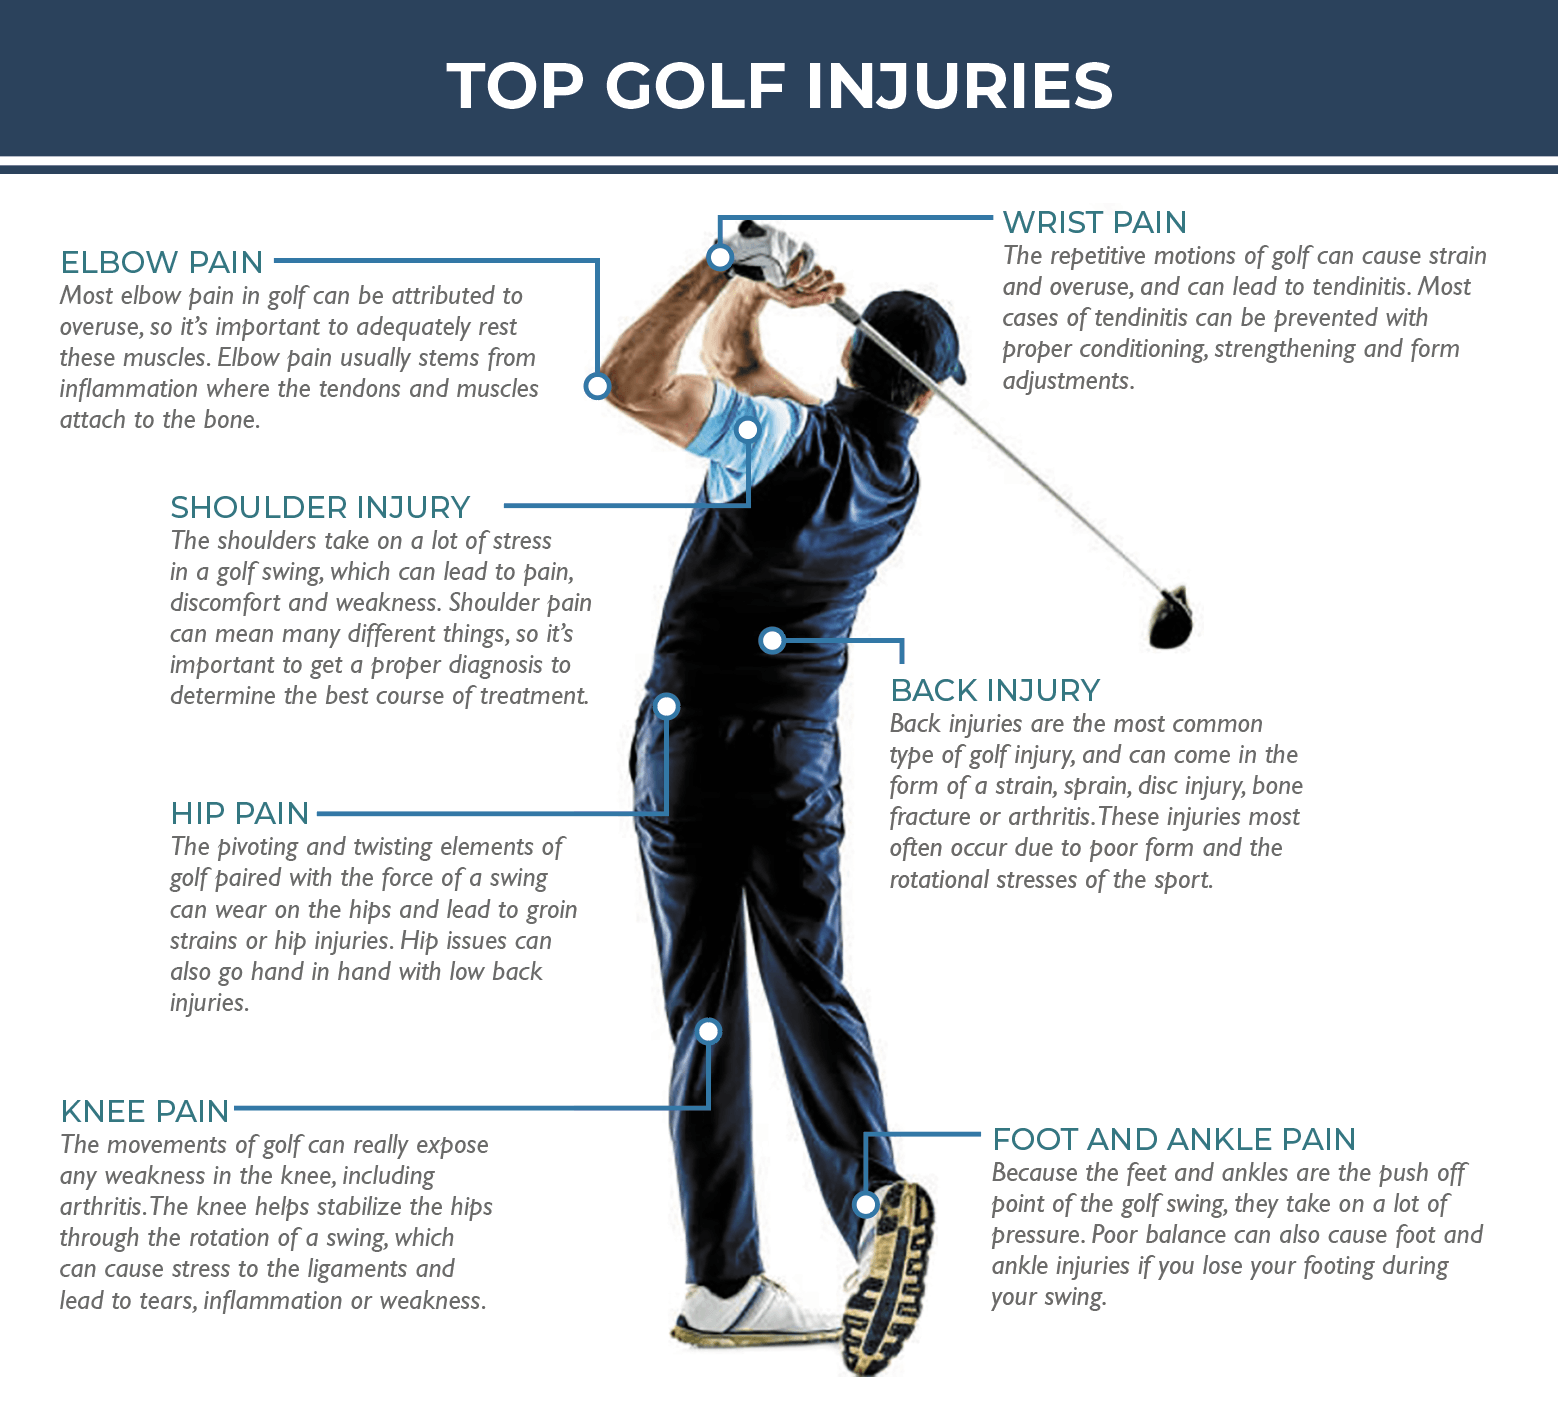 Top Golf Injuries and Prevention Tips